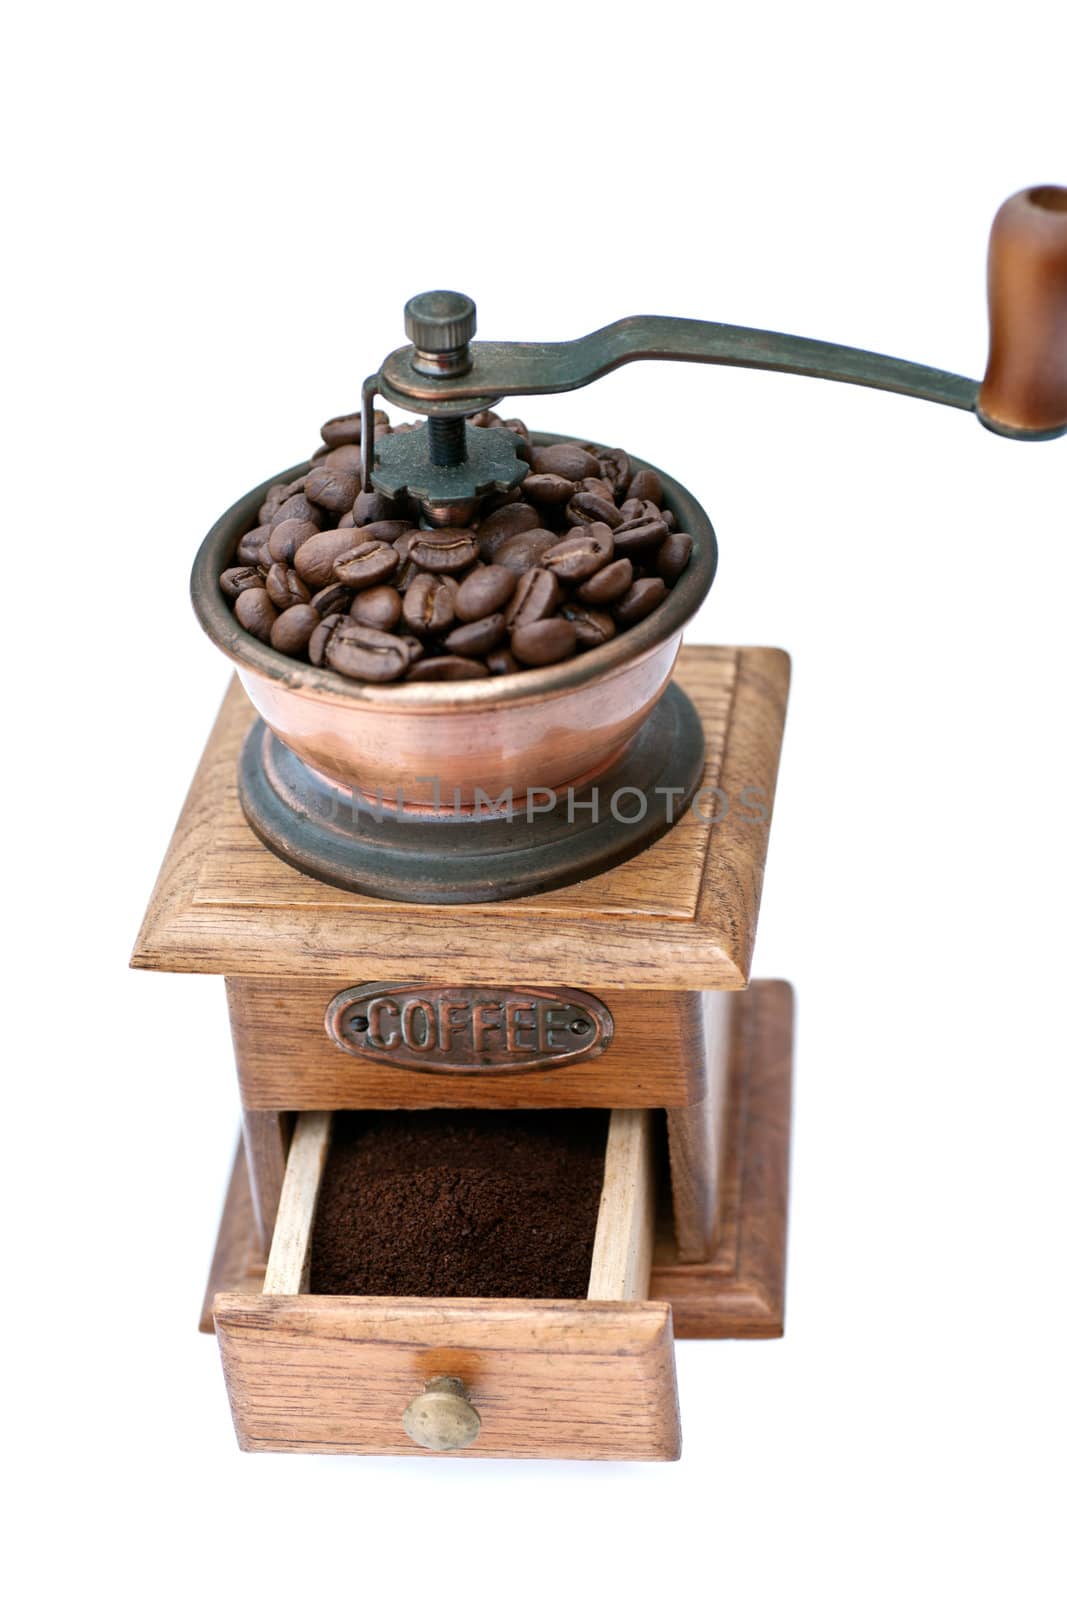 Coffee grinder and coffee beans by Marcus